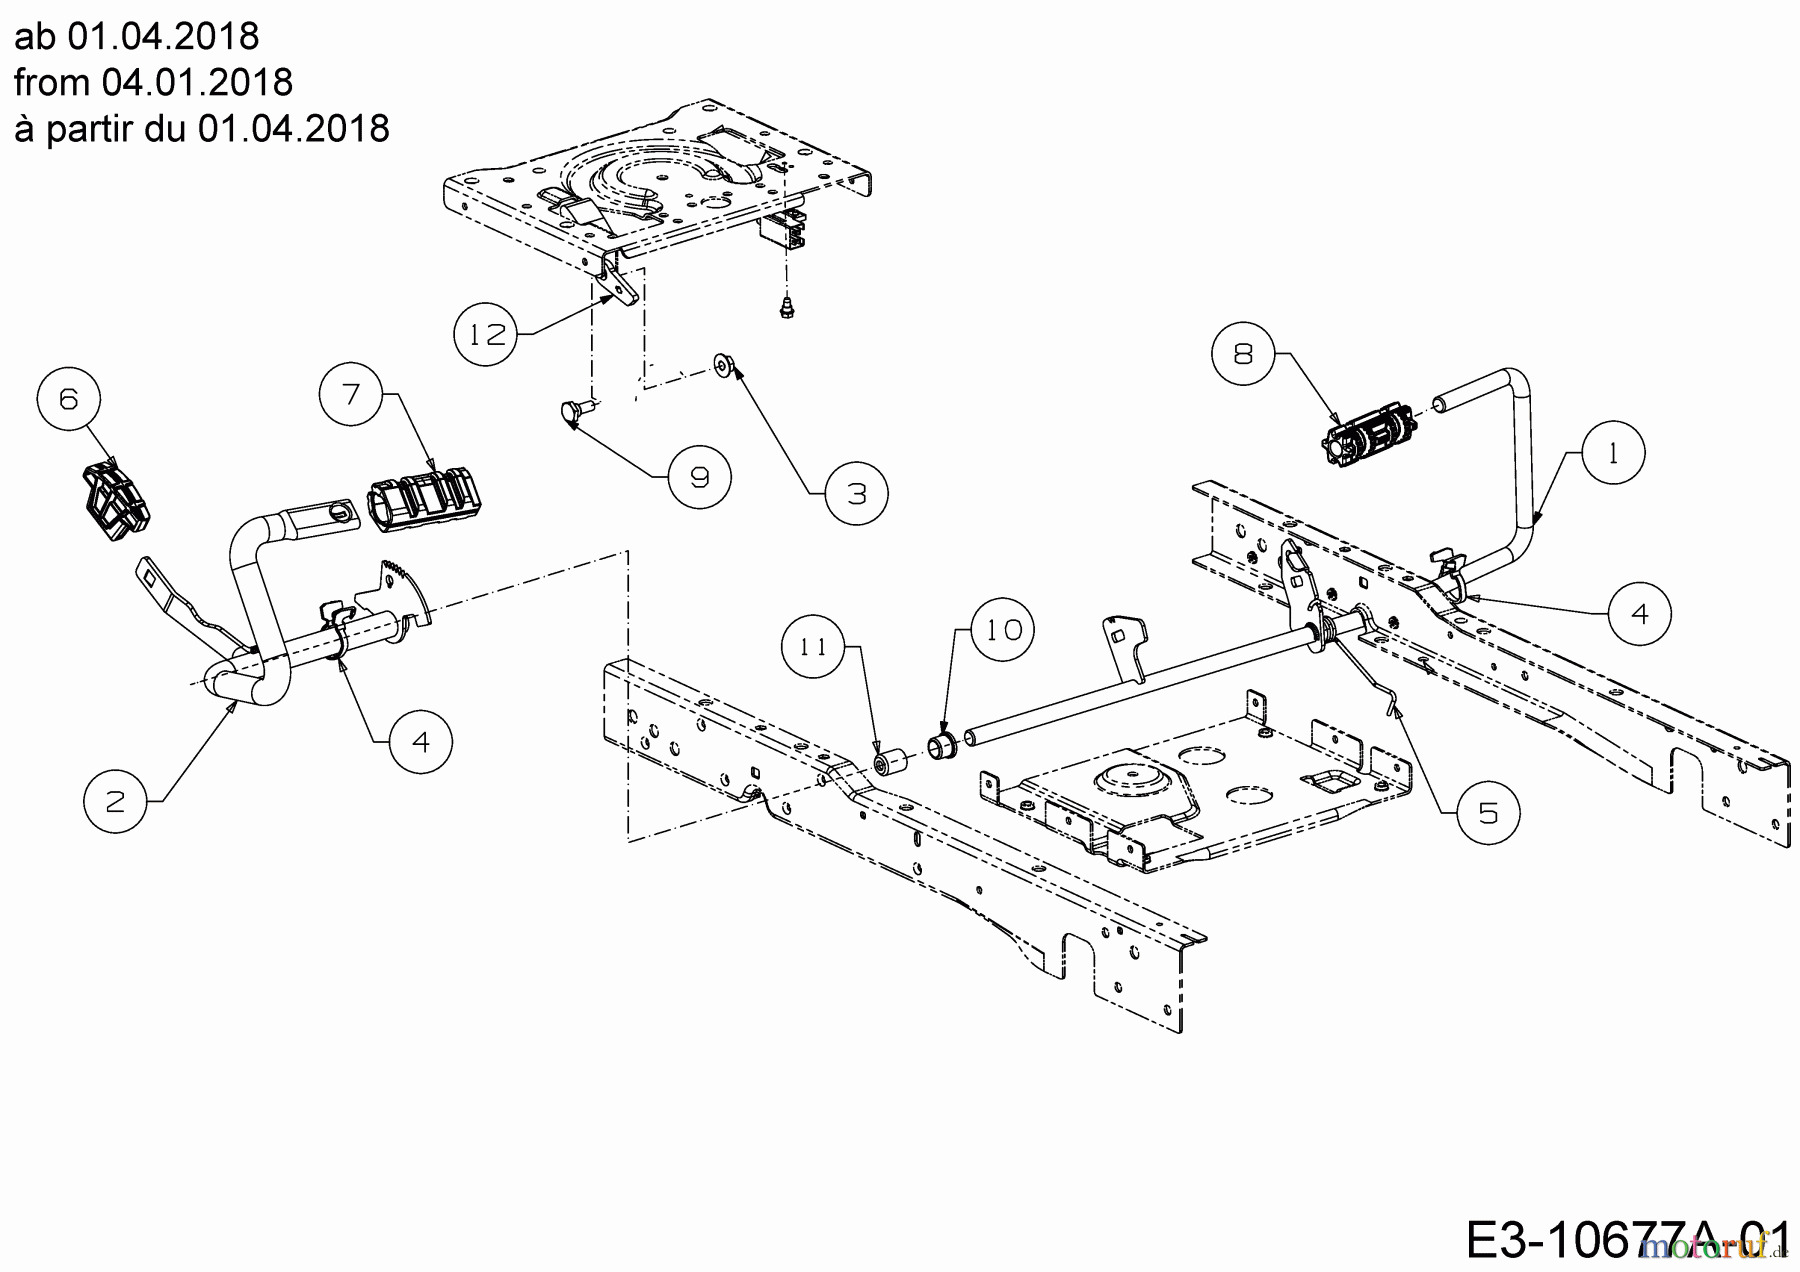  Black Edition Lawn tractors 285-117 TWIN KH 13AIA1KT615  (2018) Pedals from 04.01.2018